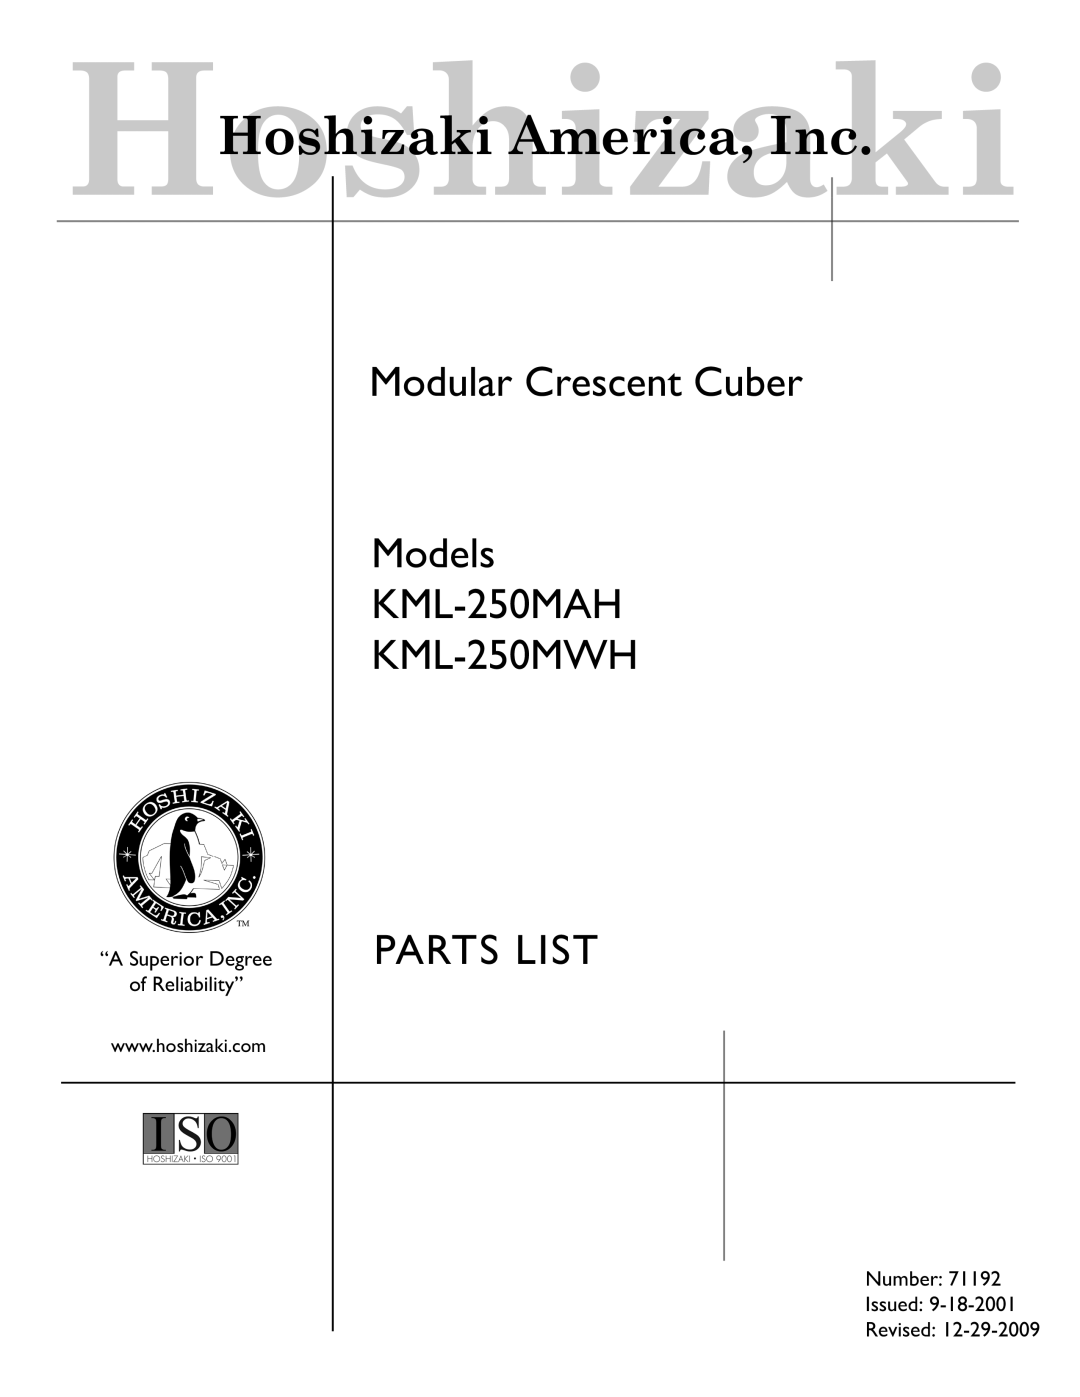 Hoshizaki MRH, MWH instruction manual Low-ProfileModular Crescent Cuber, “A Superior Degree of Reliability”, Issued 